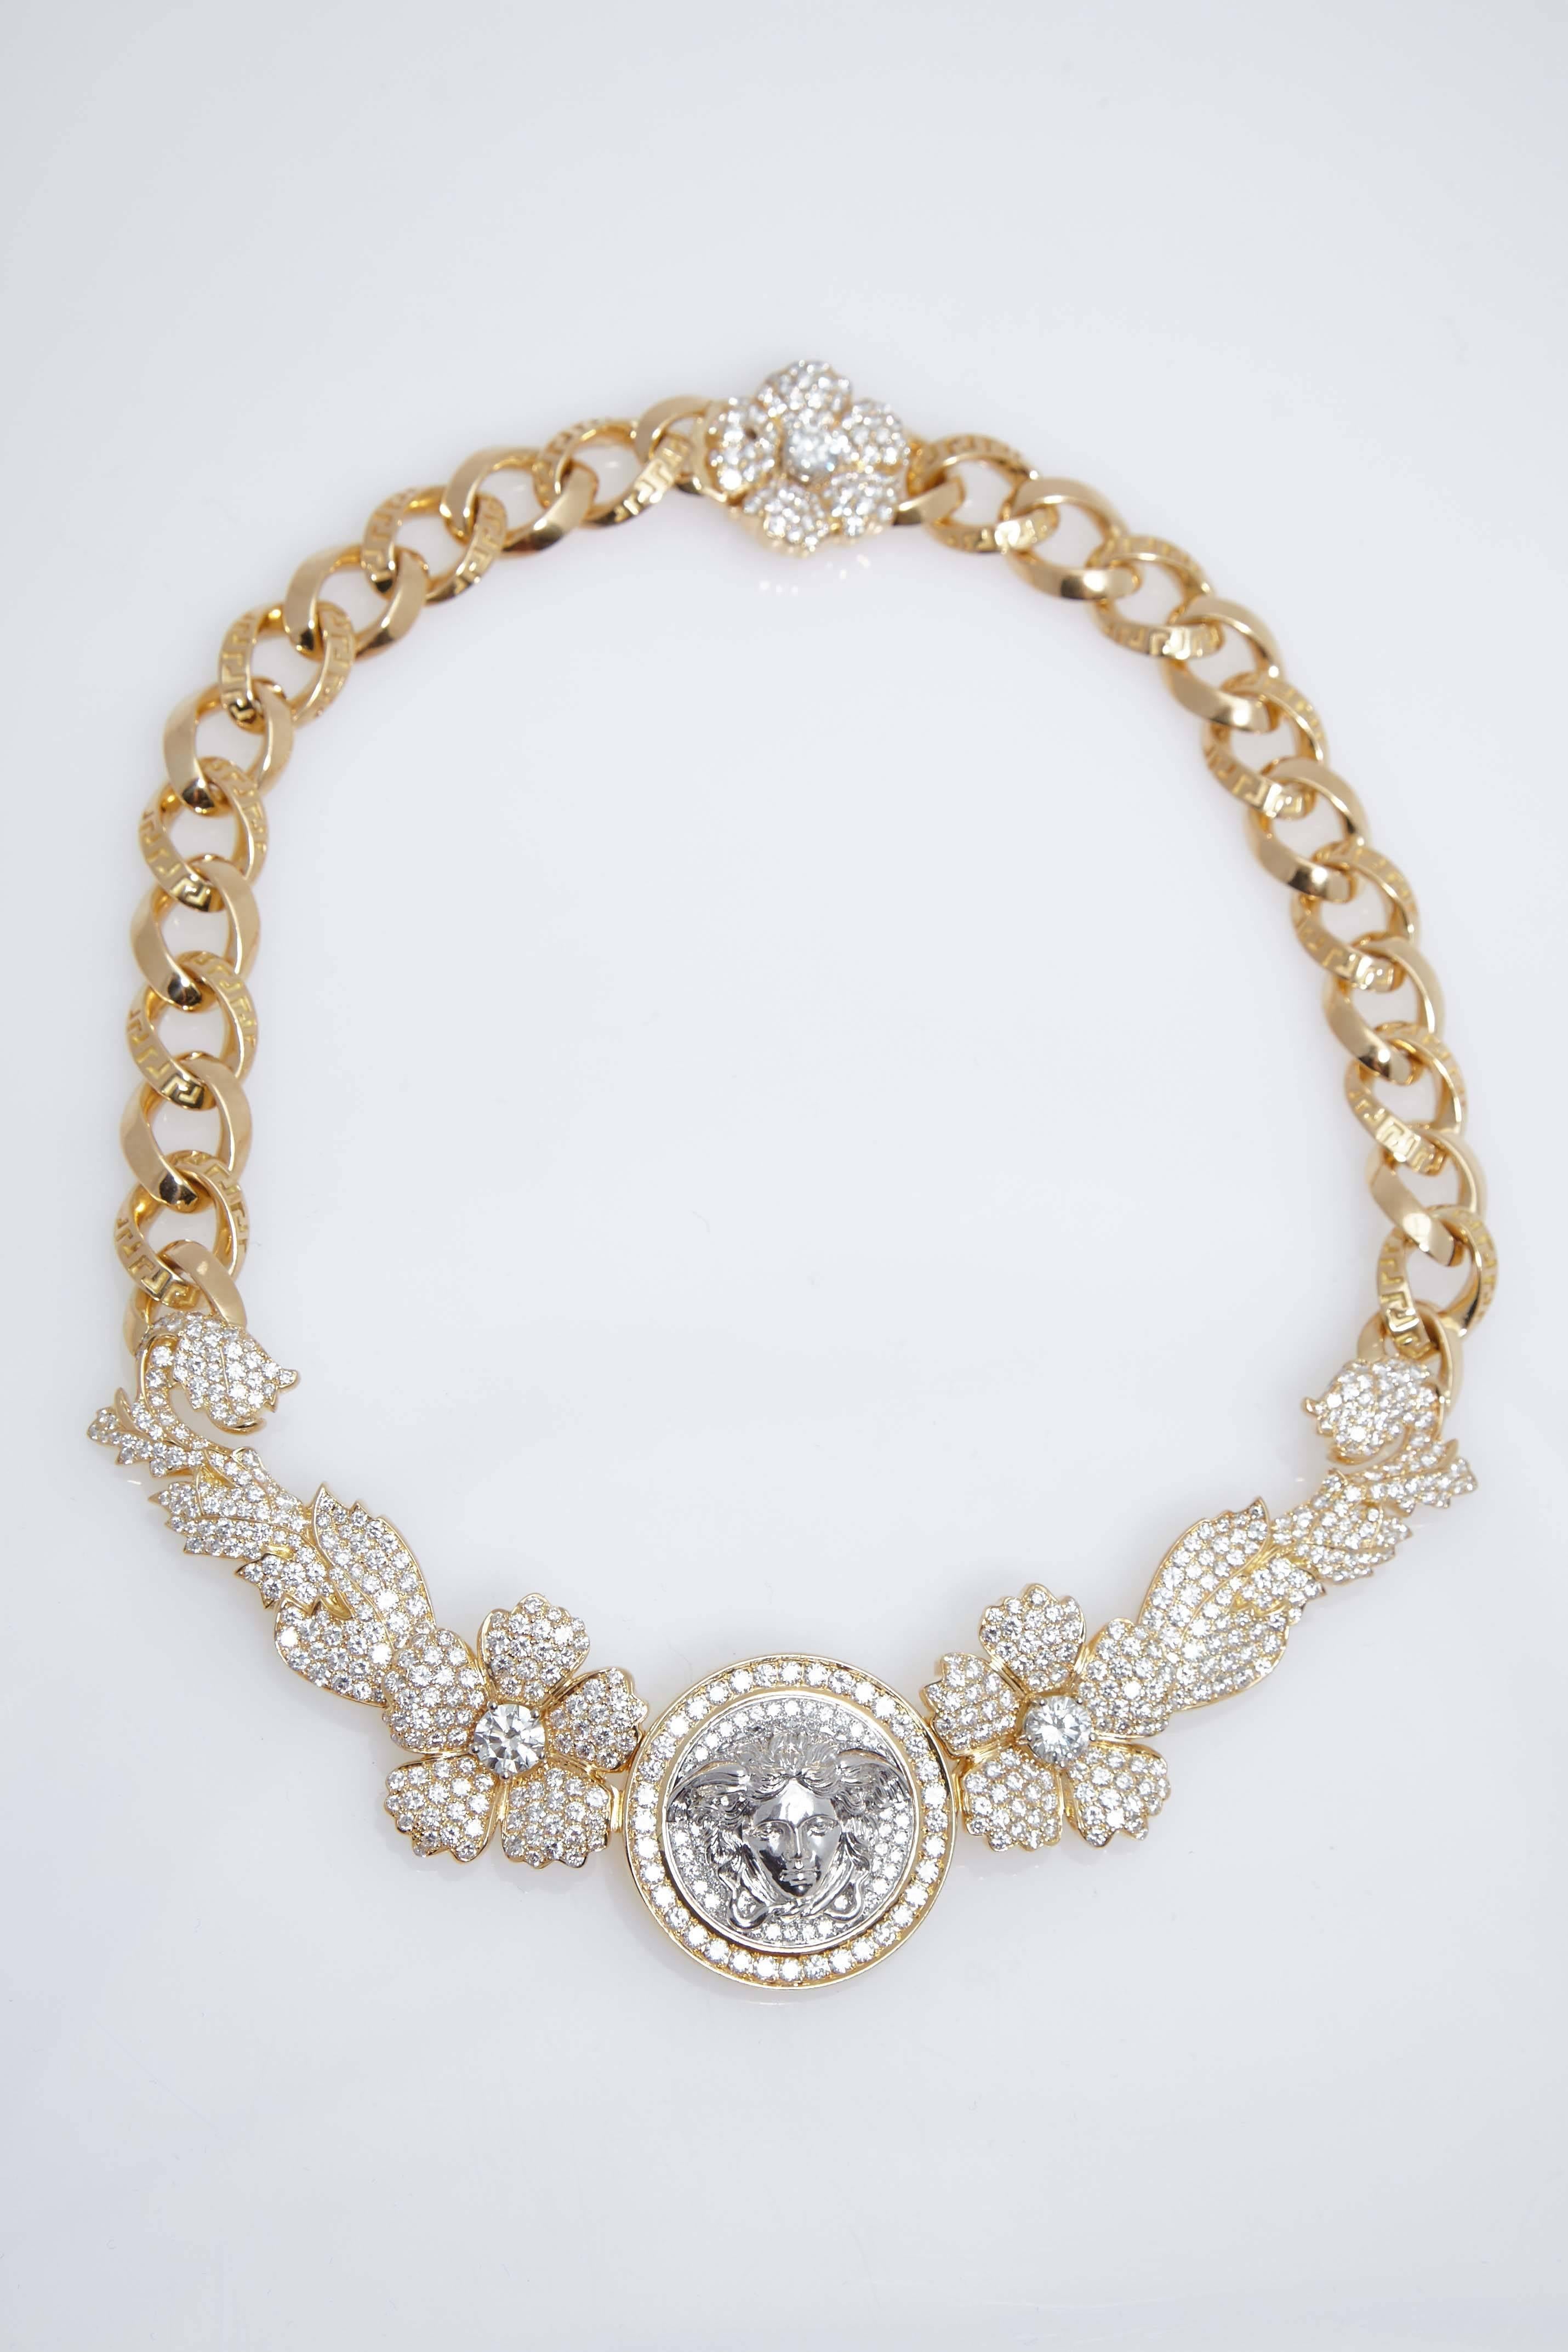 Versace eighteen karat yellow gold and diamond "Tiara" necklace designed by Gianni Versace. Necklace contains approximately 24.24 carats in round diamonds. Necklace is numbered "002"  The three largest stones in the necklace are